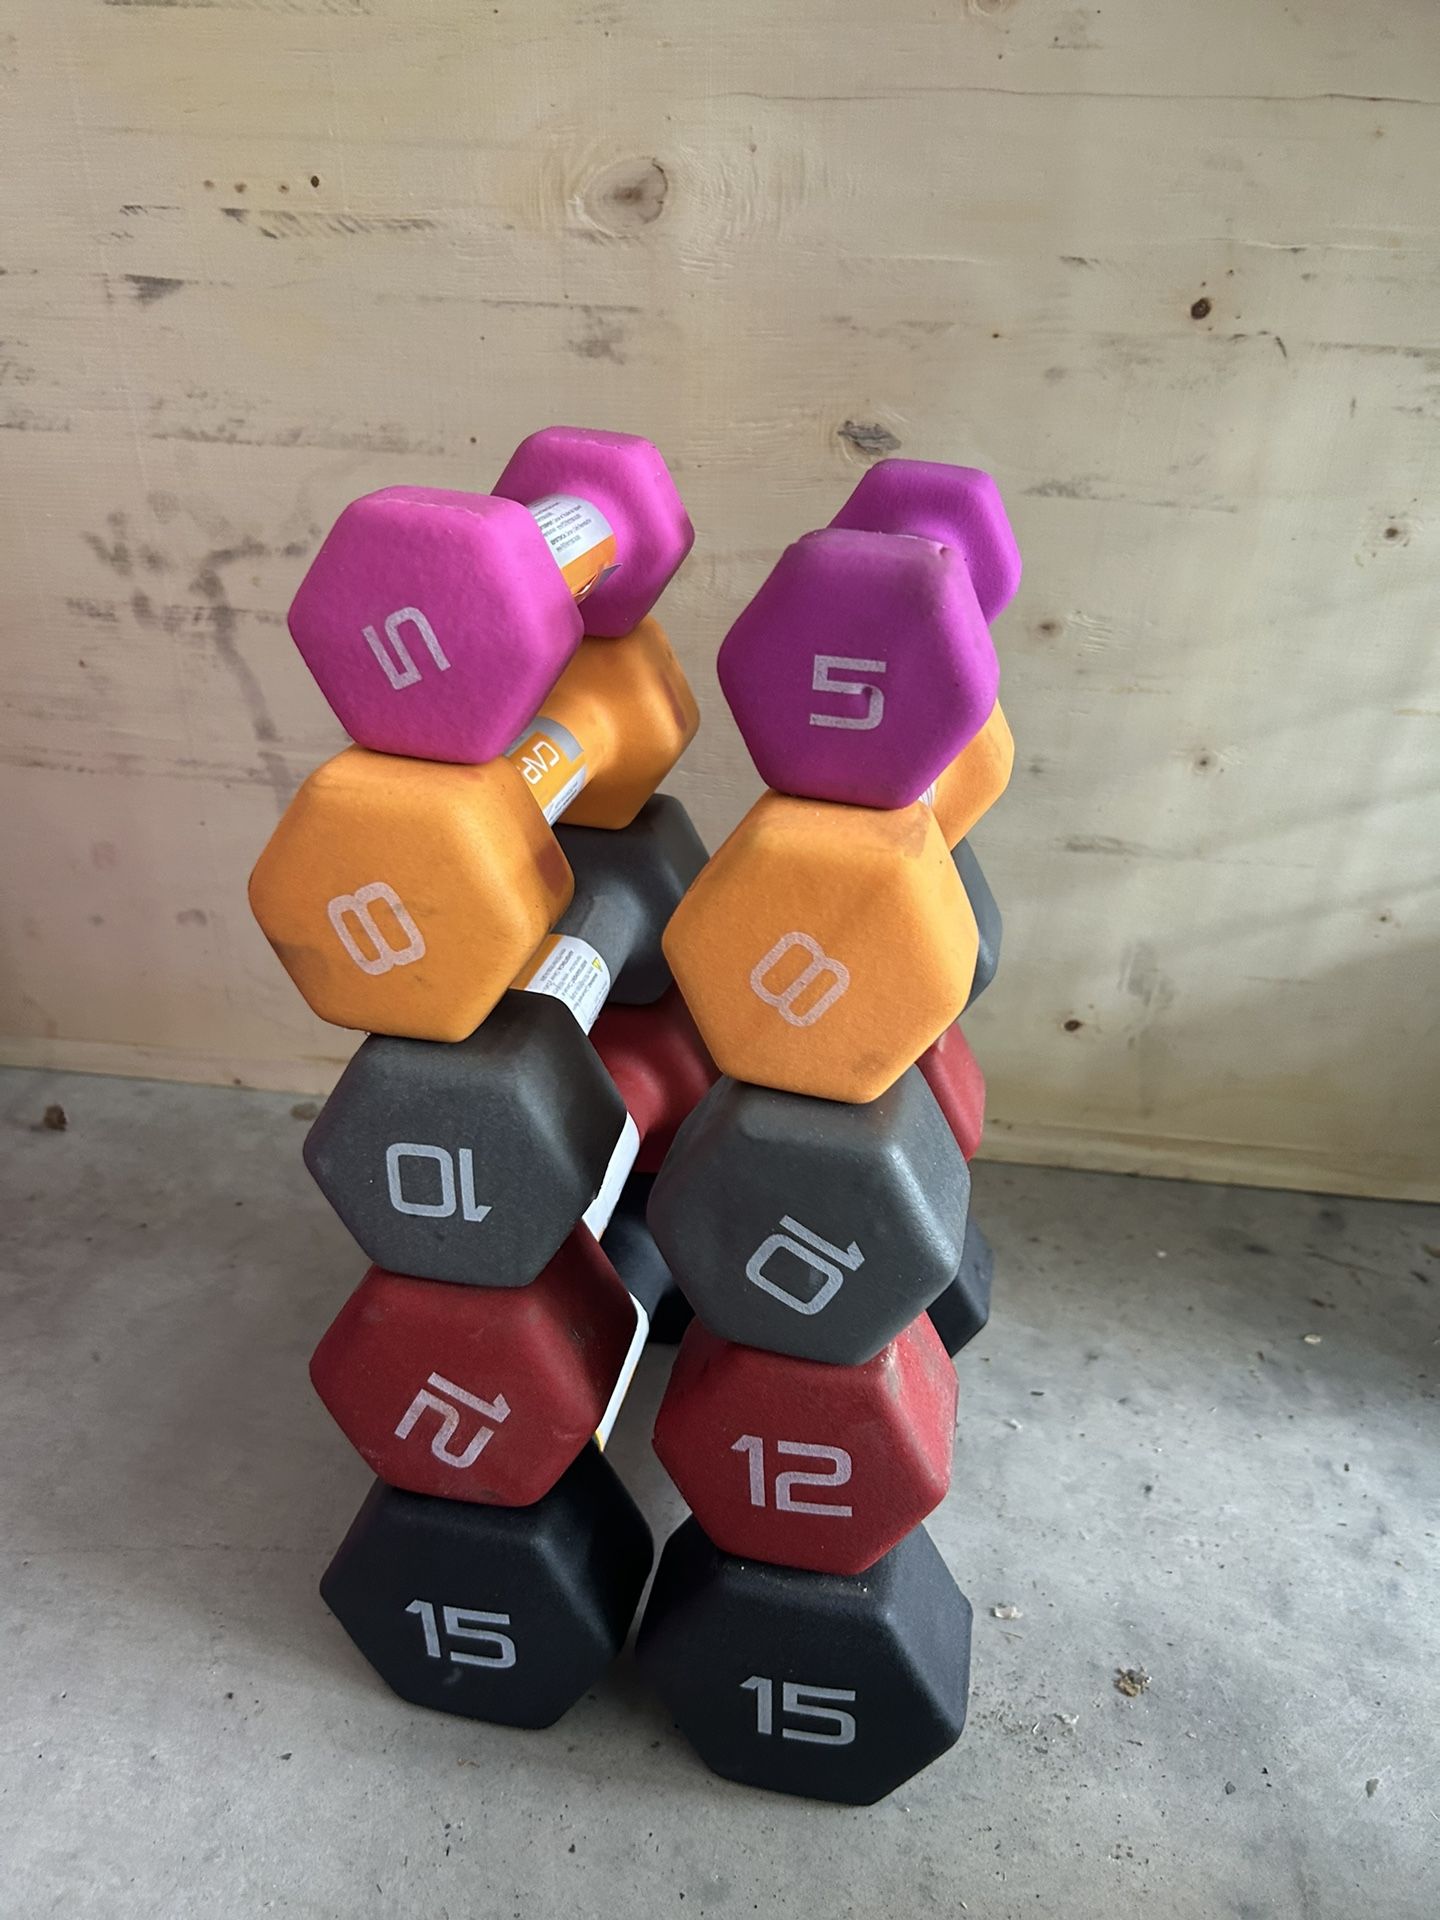 New pair of 5,8,10,12,15lb neoprene dumbbells with cuts in the neoprene